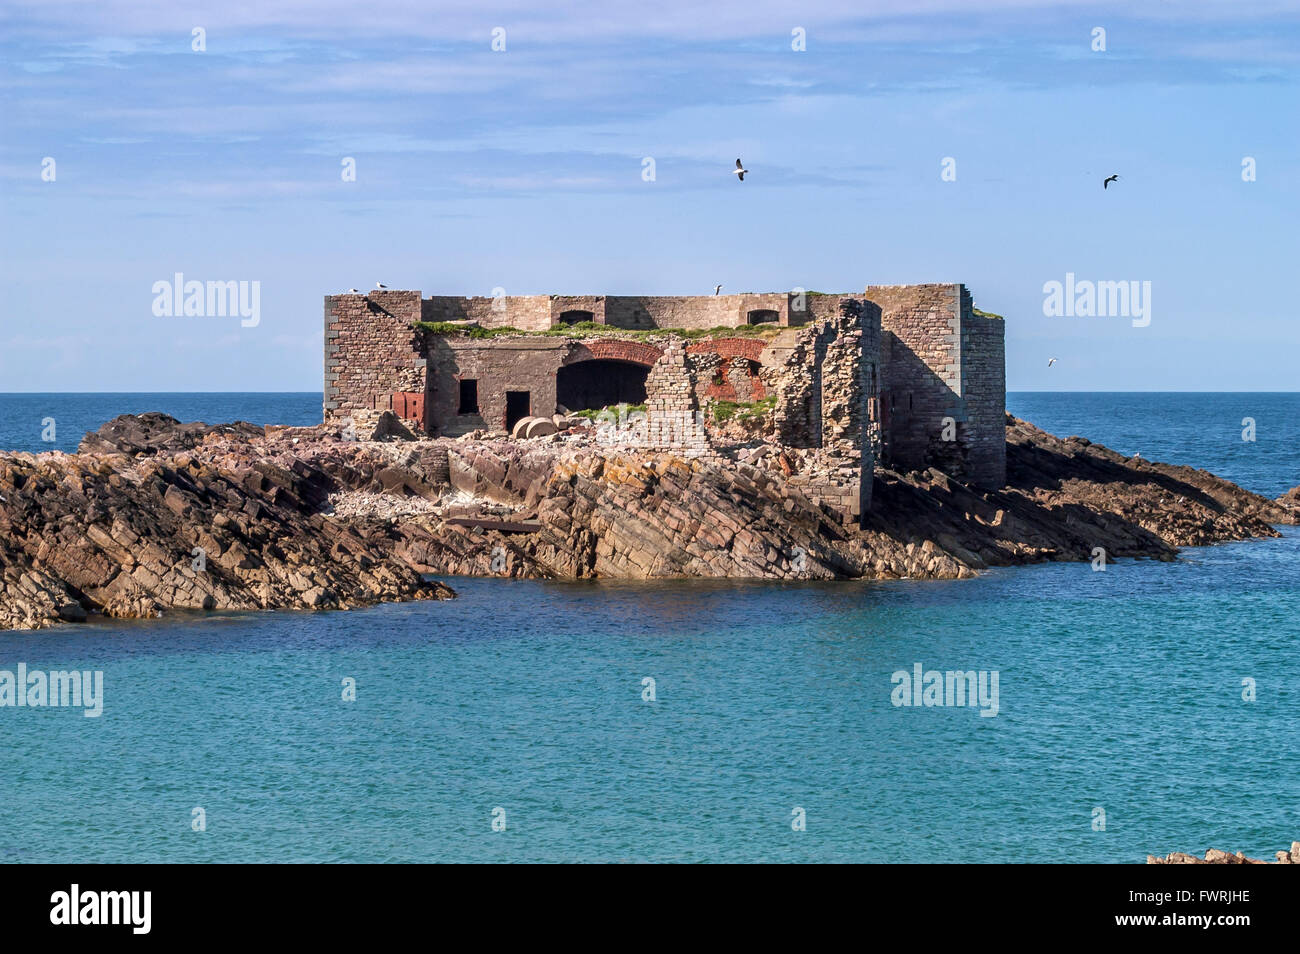 Views on the western coast of the island of Alderney. Stock Photo